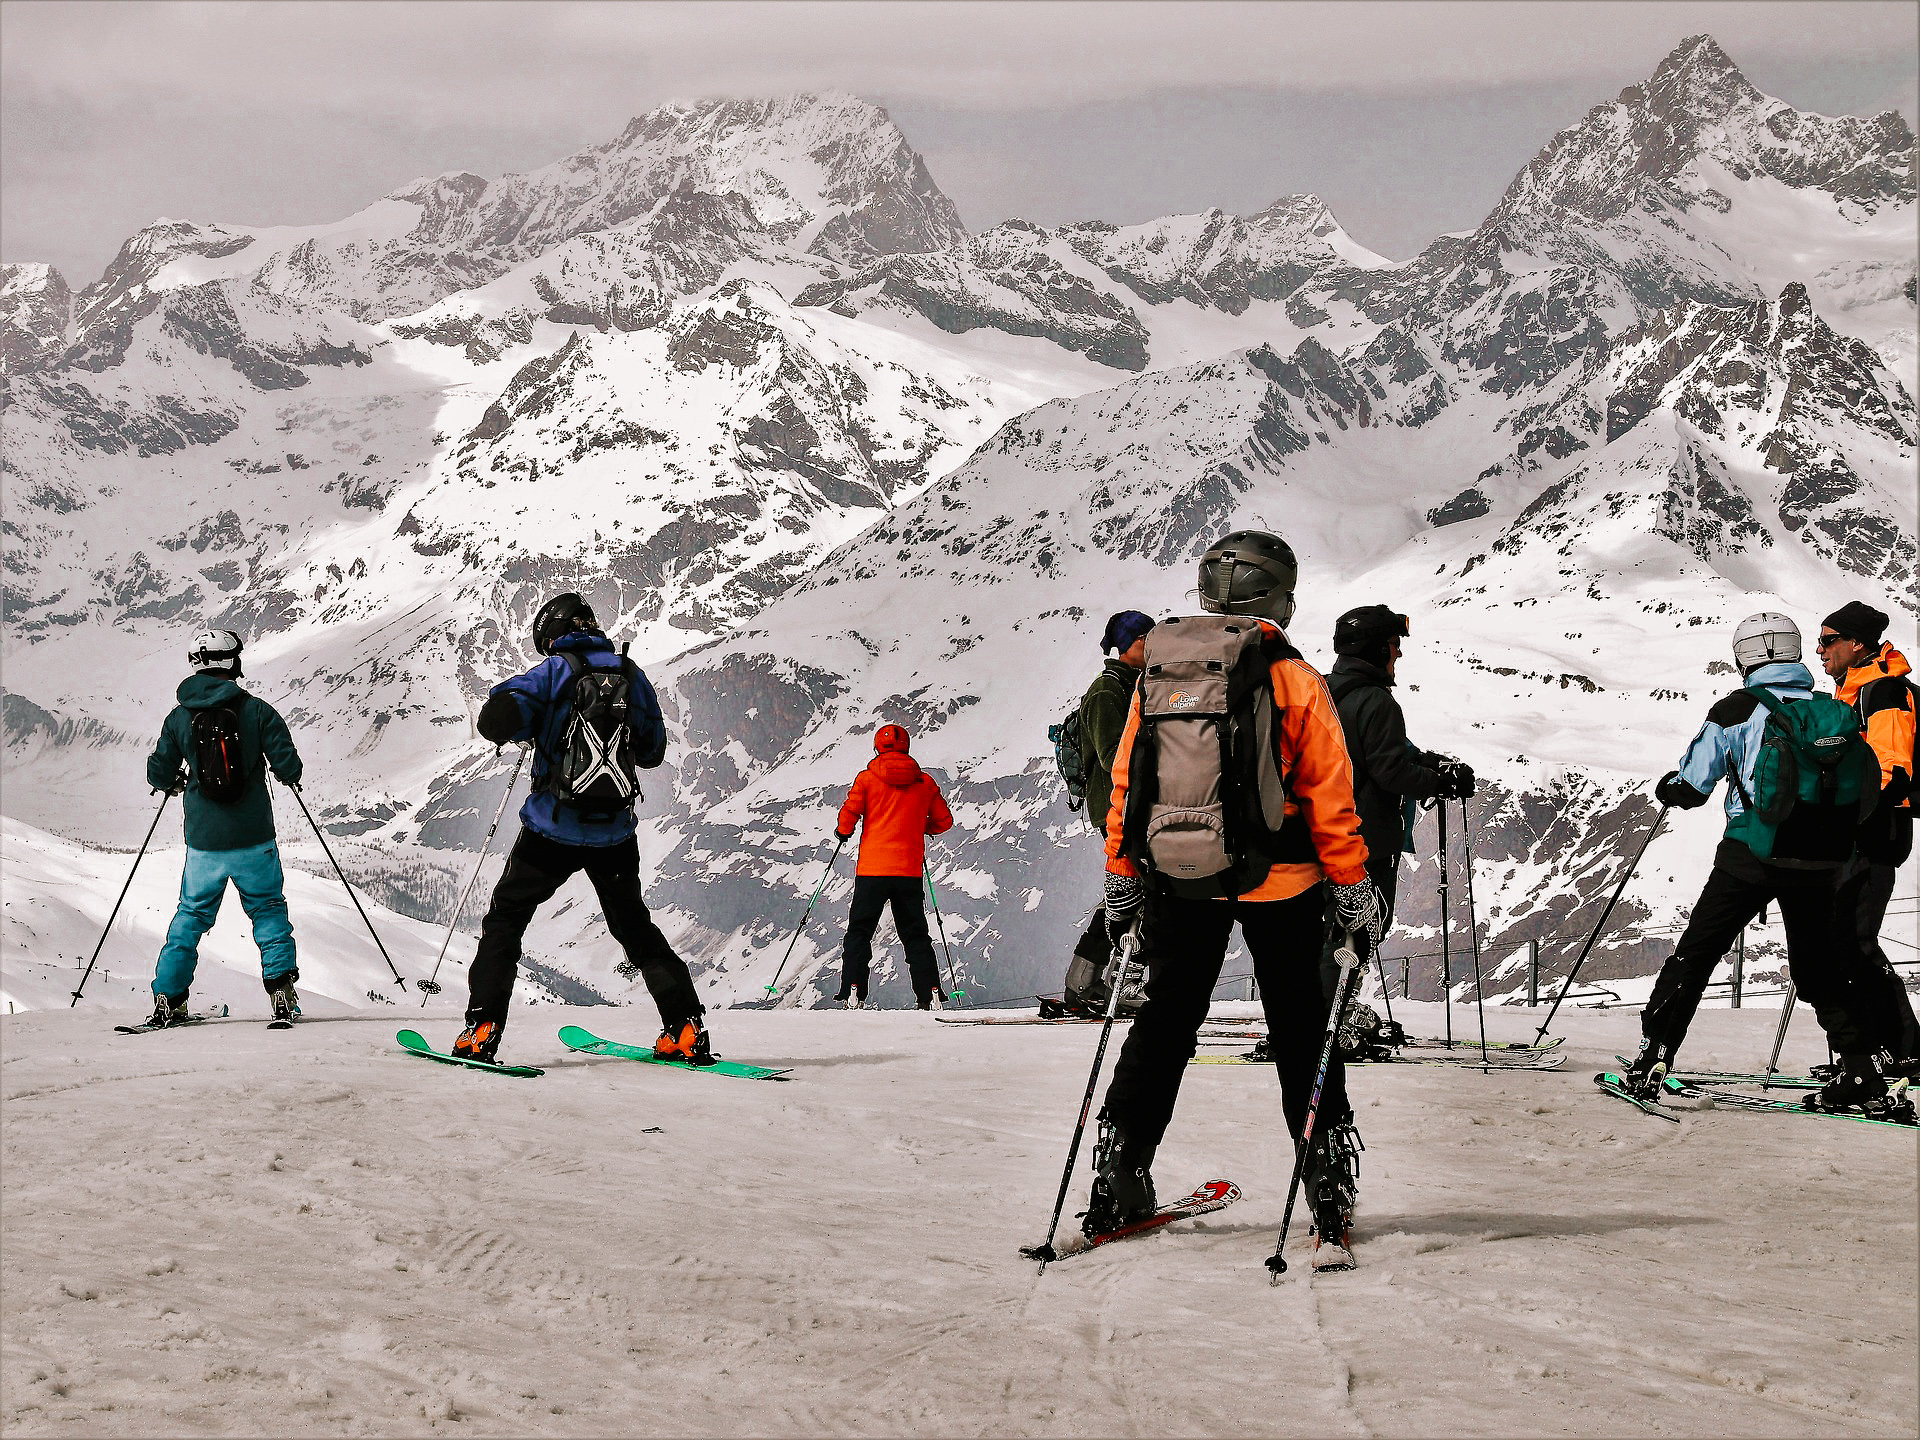 8 skiiers standing around at a ski run in the alps during winter.